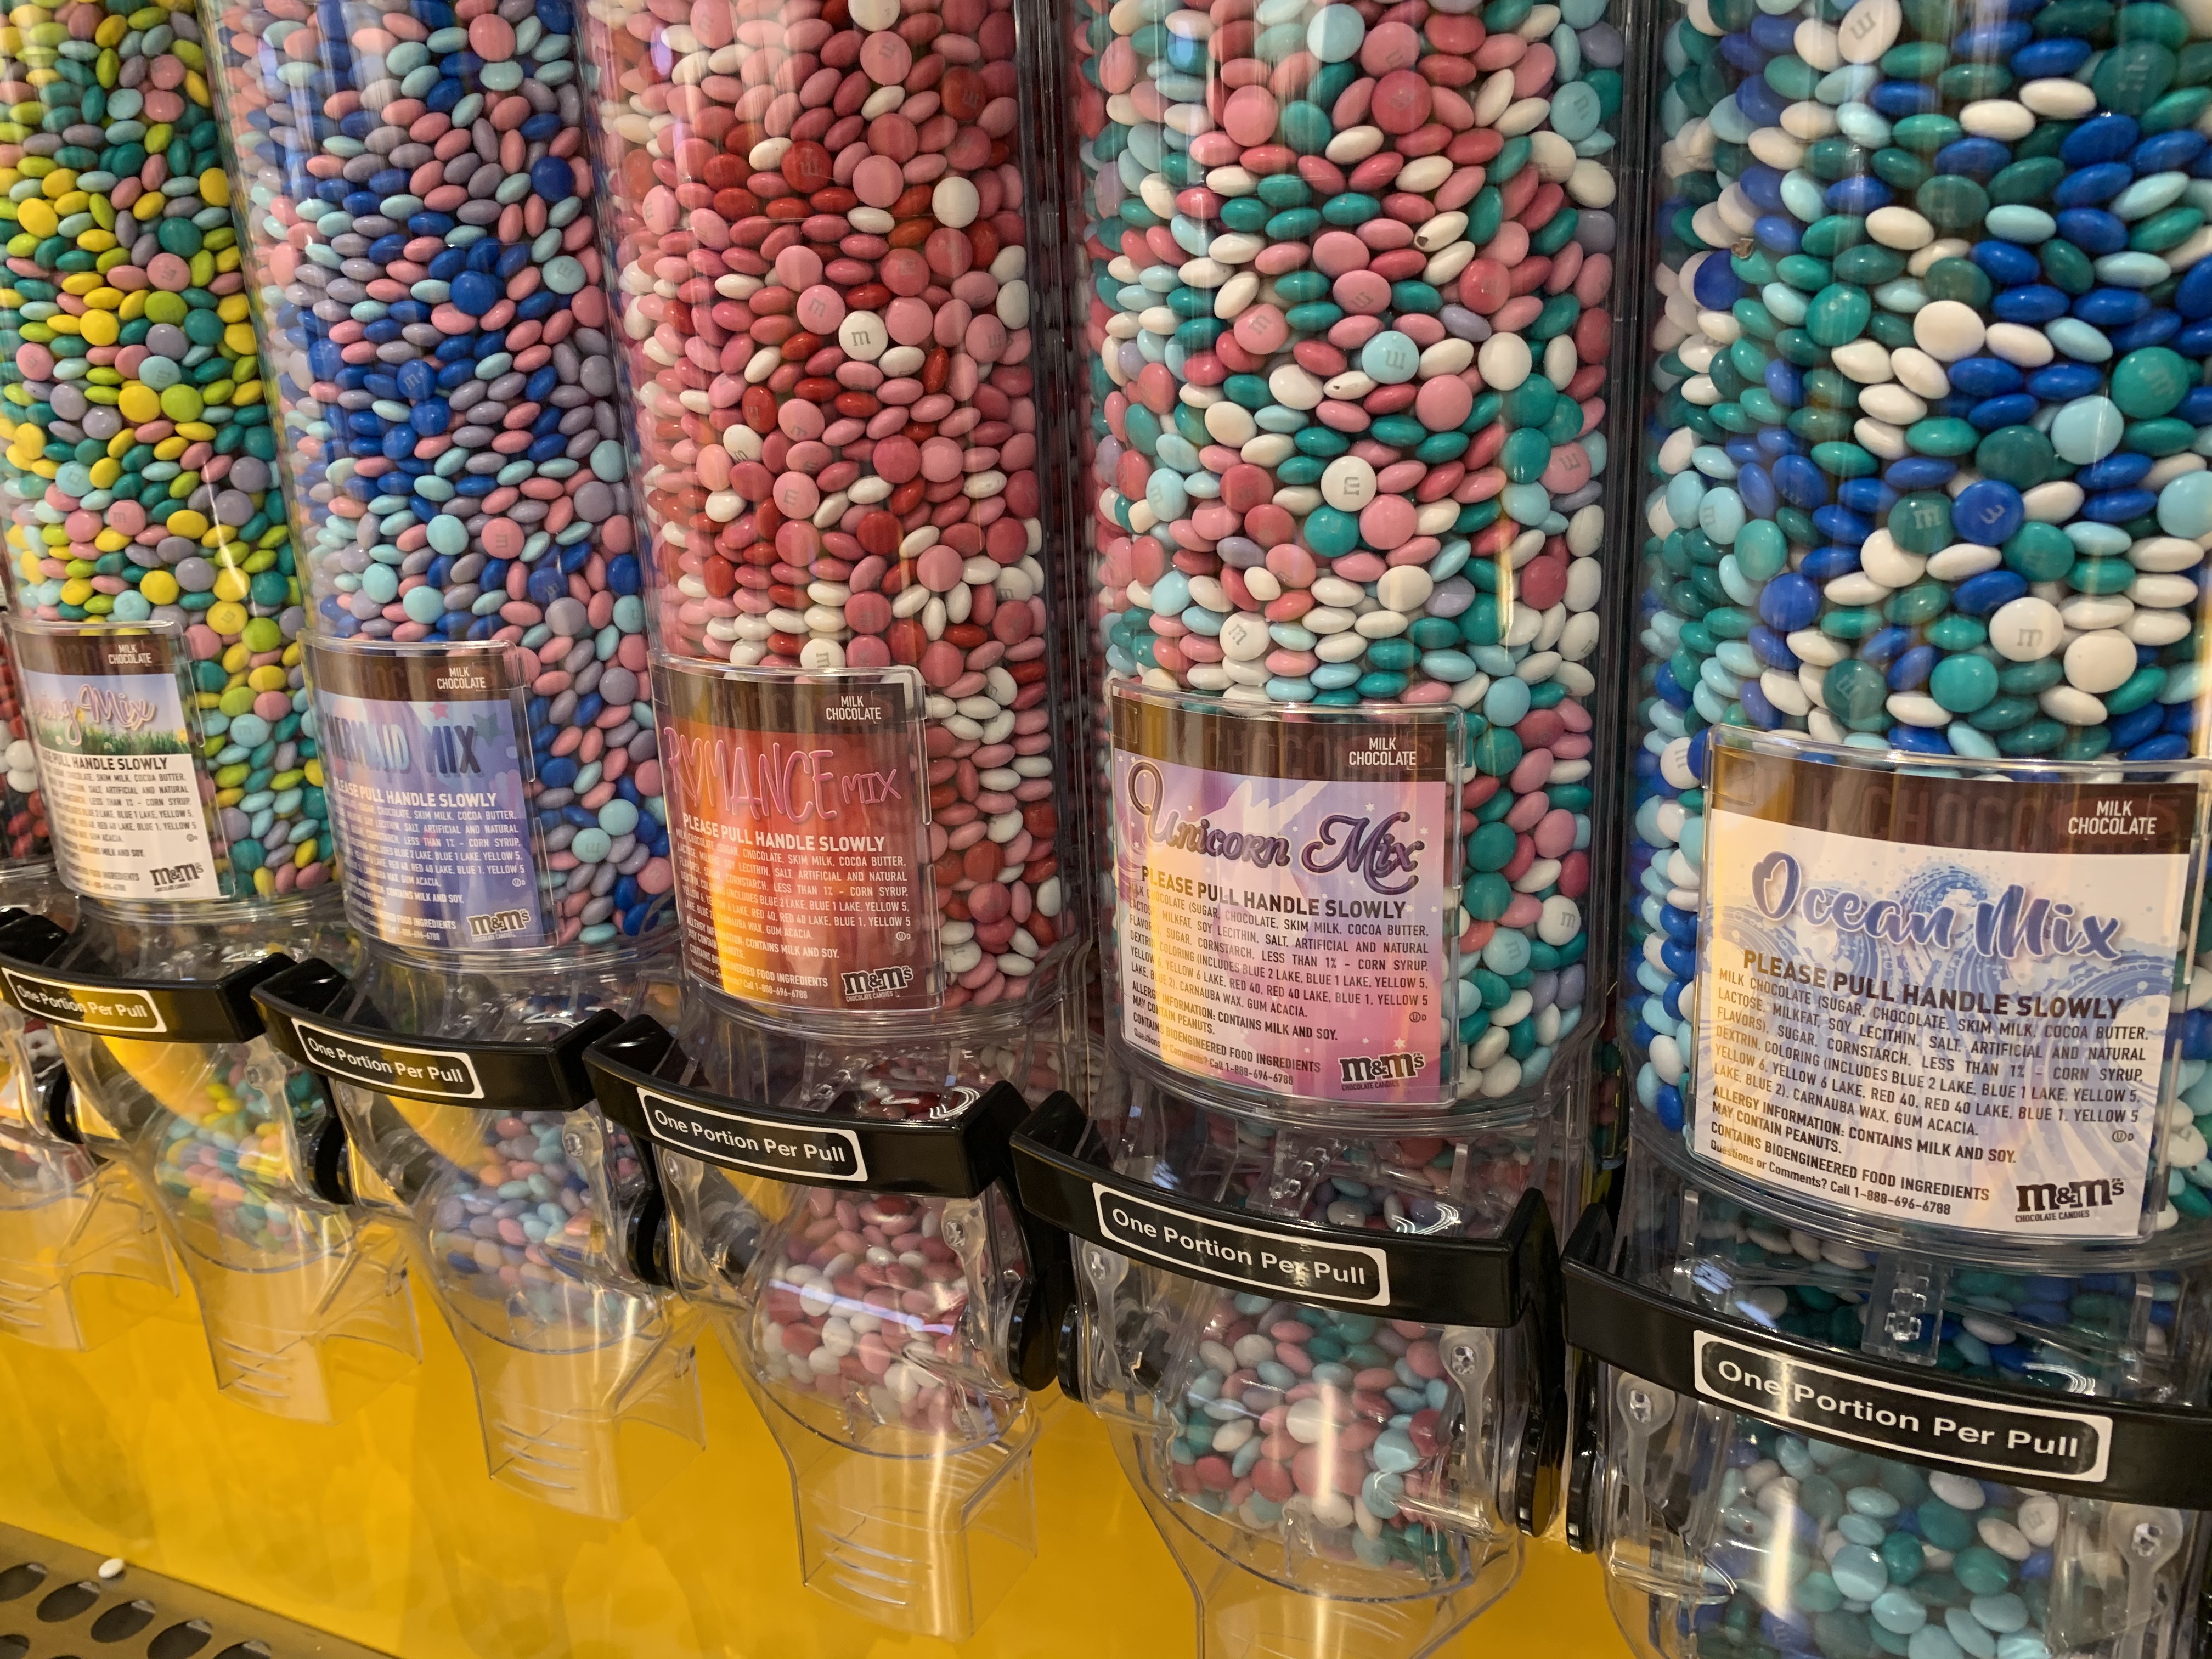 Creating Personalized M&Ms at the M&M Store at Disney Springs